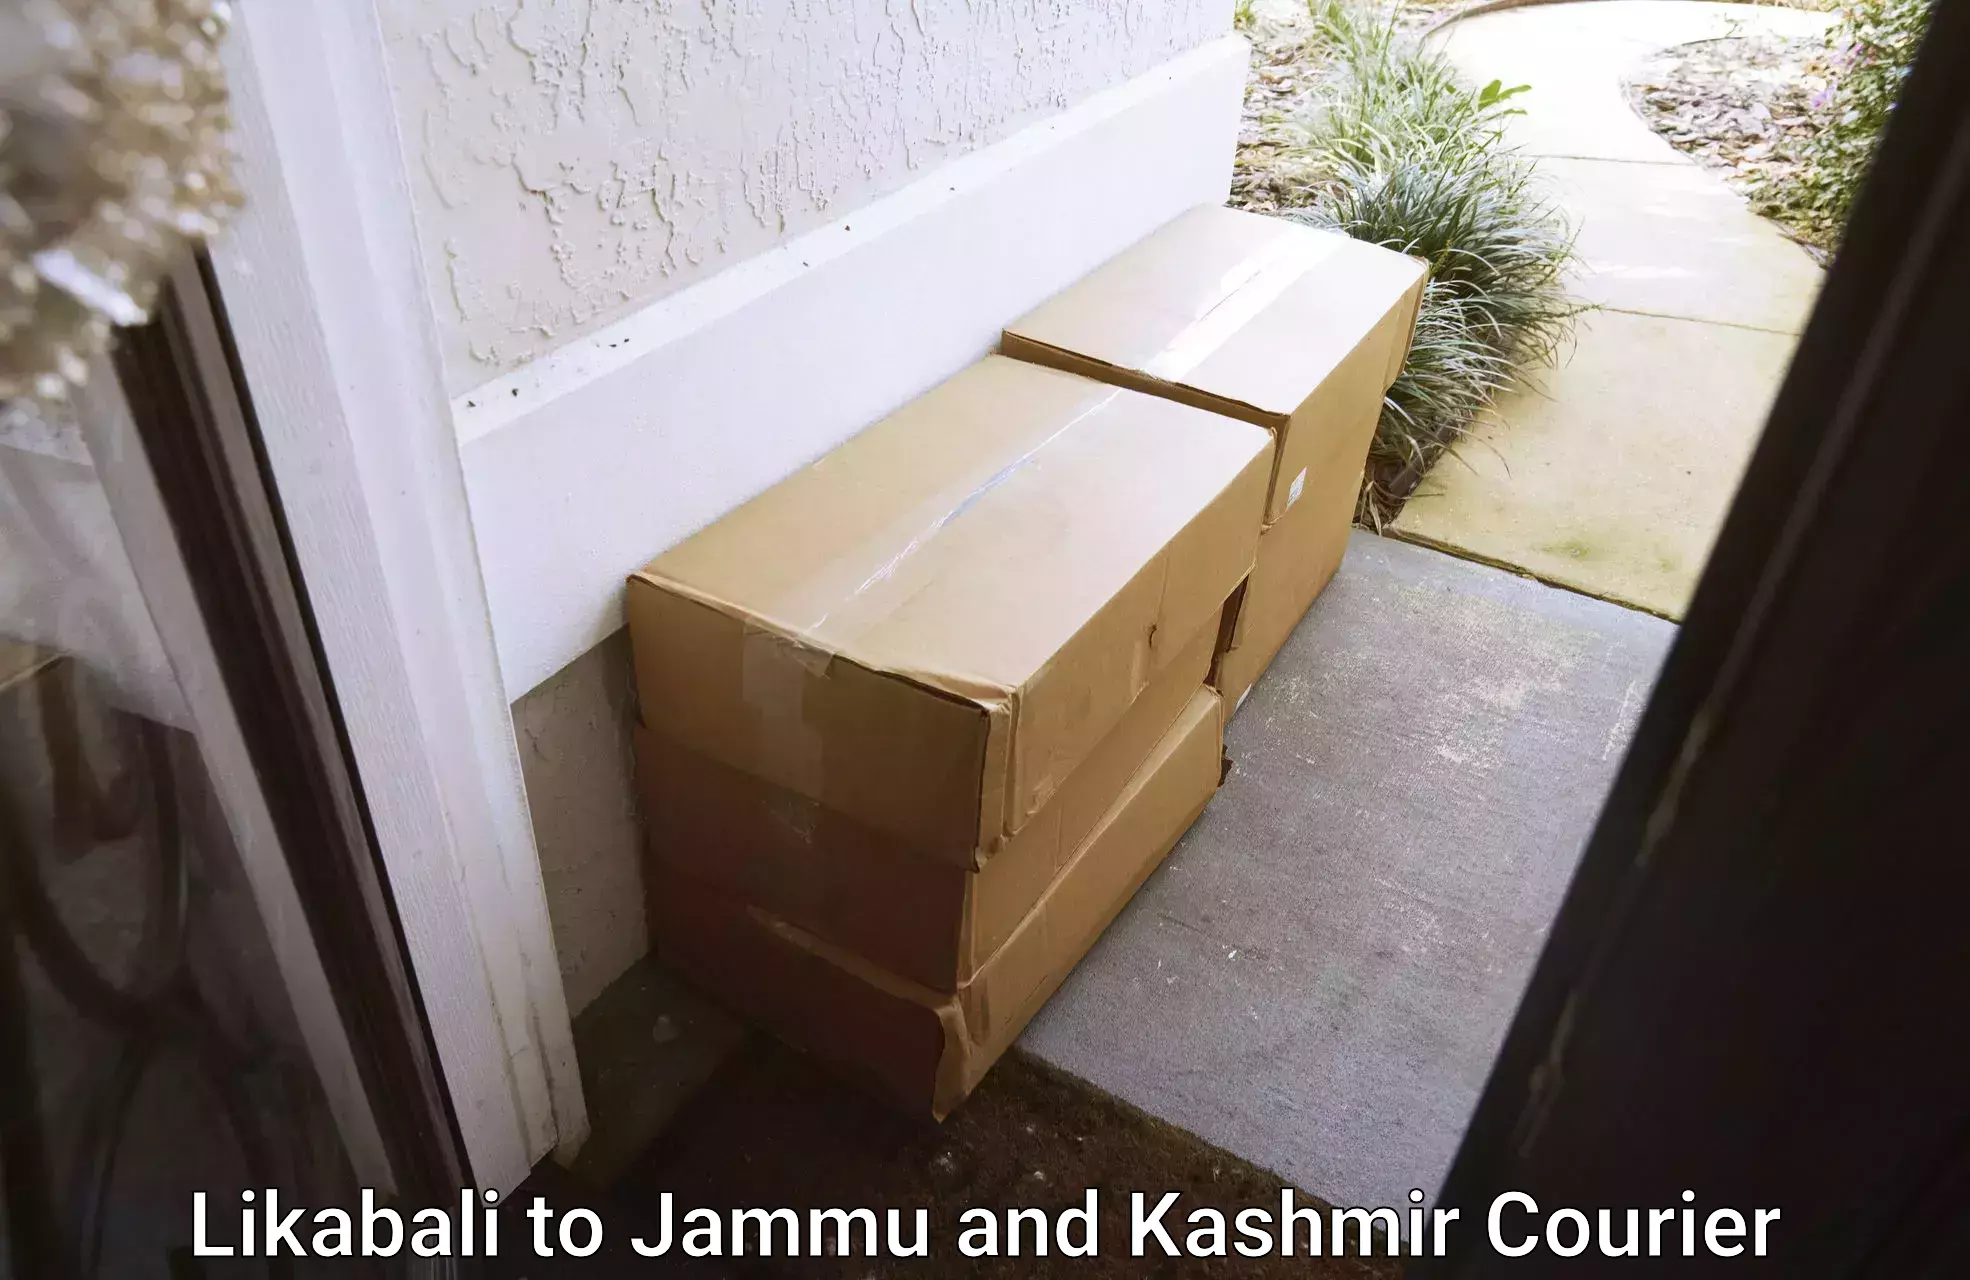 24-hour courier services Likabali to Ramban